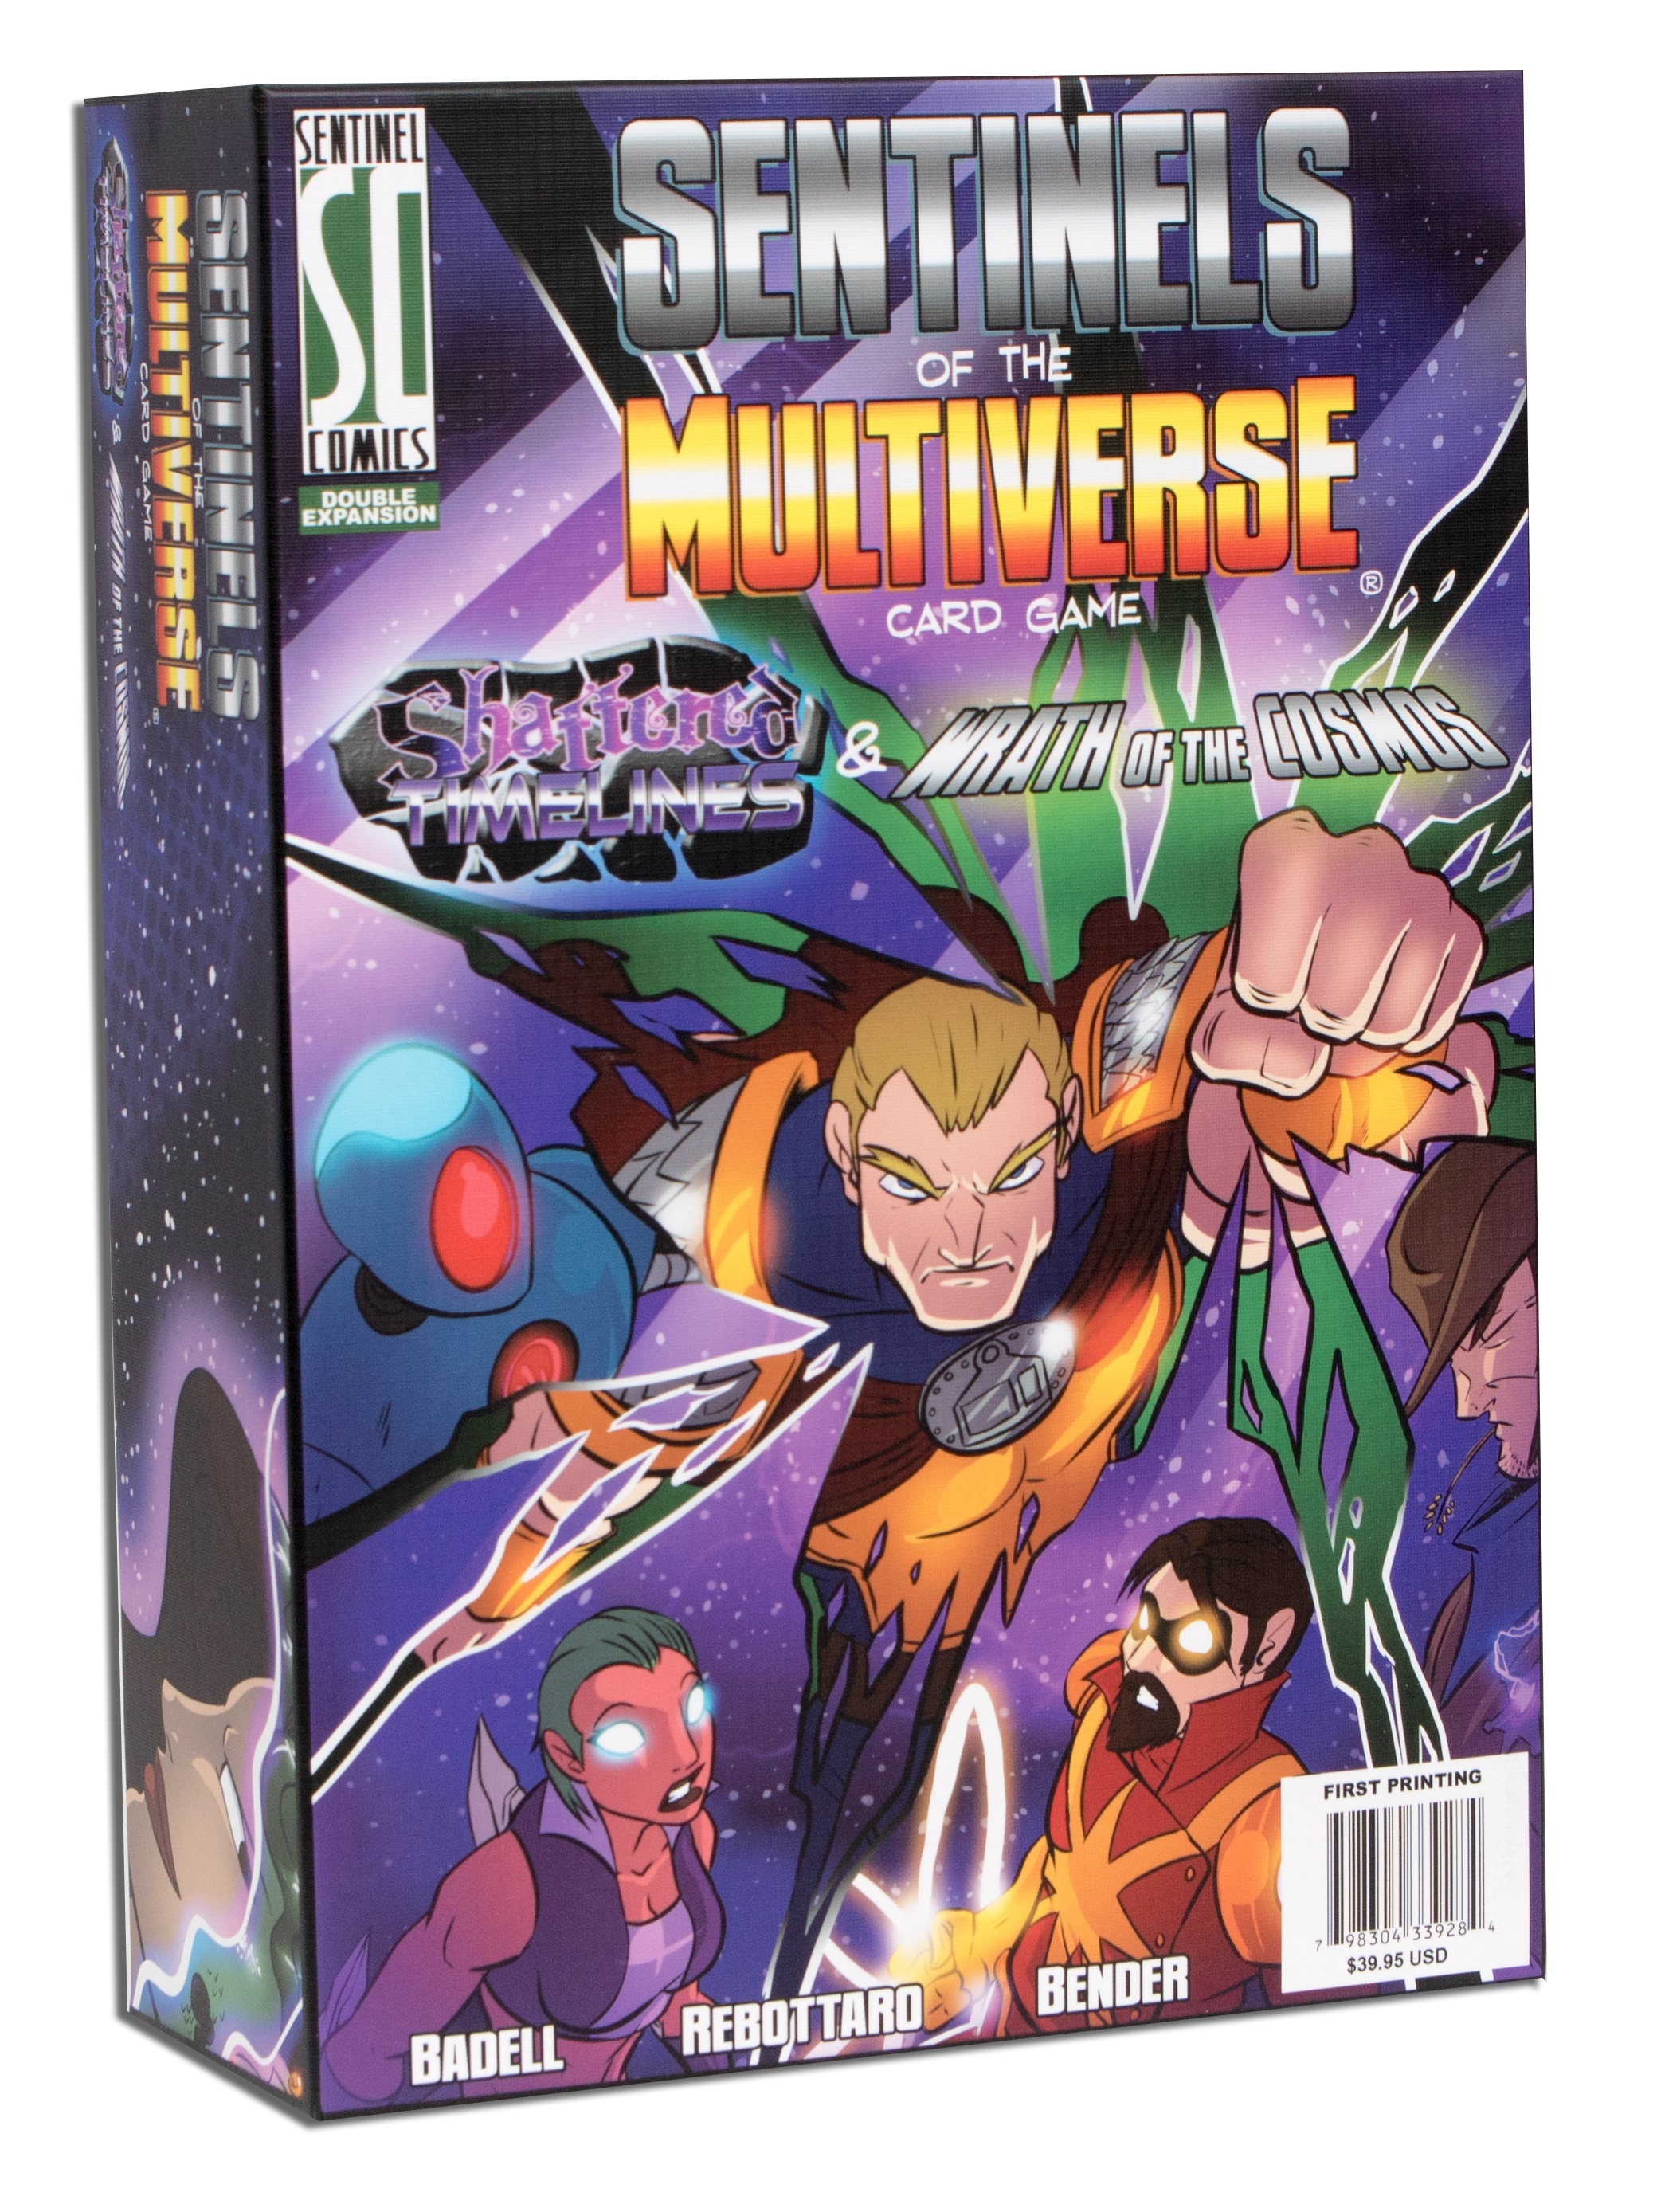 Sentinel Comics Sentinels of the Multiverse: Shattered Timelines & Wrath of the Cosmos